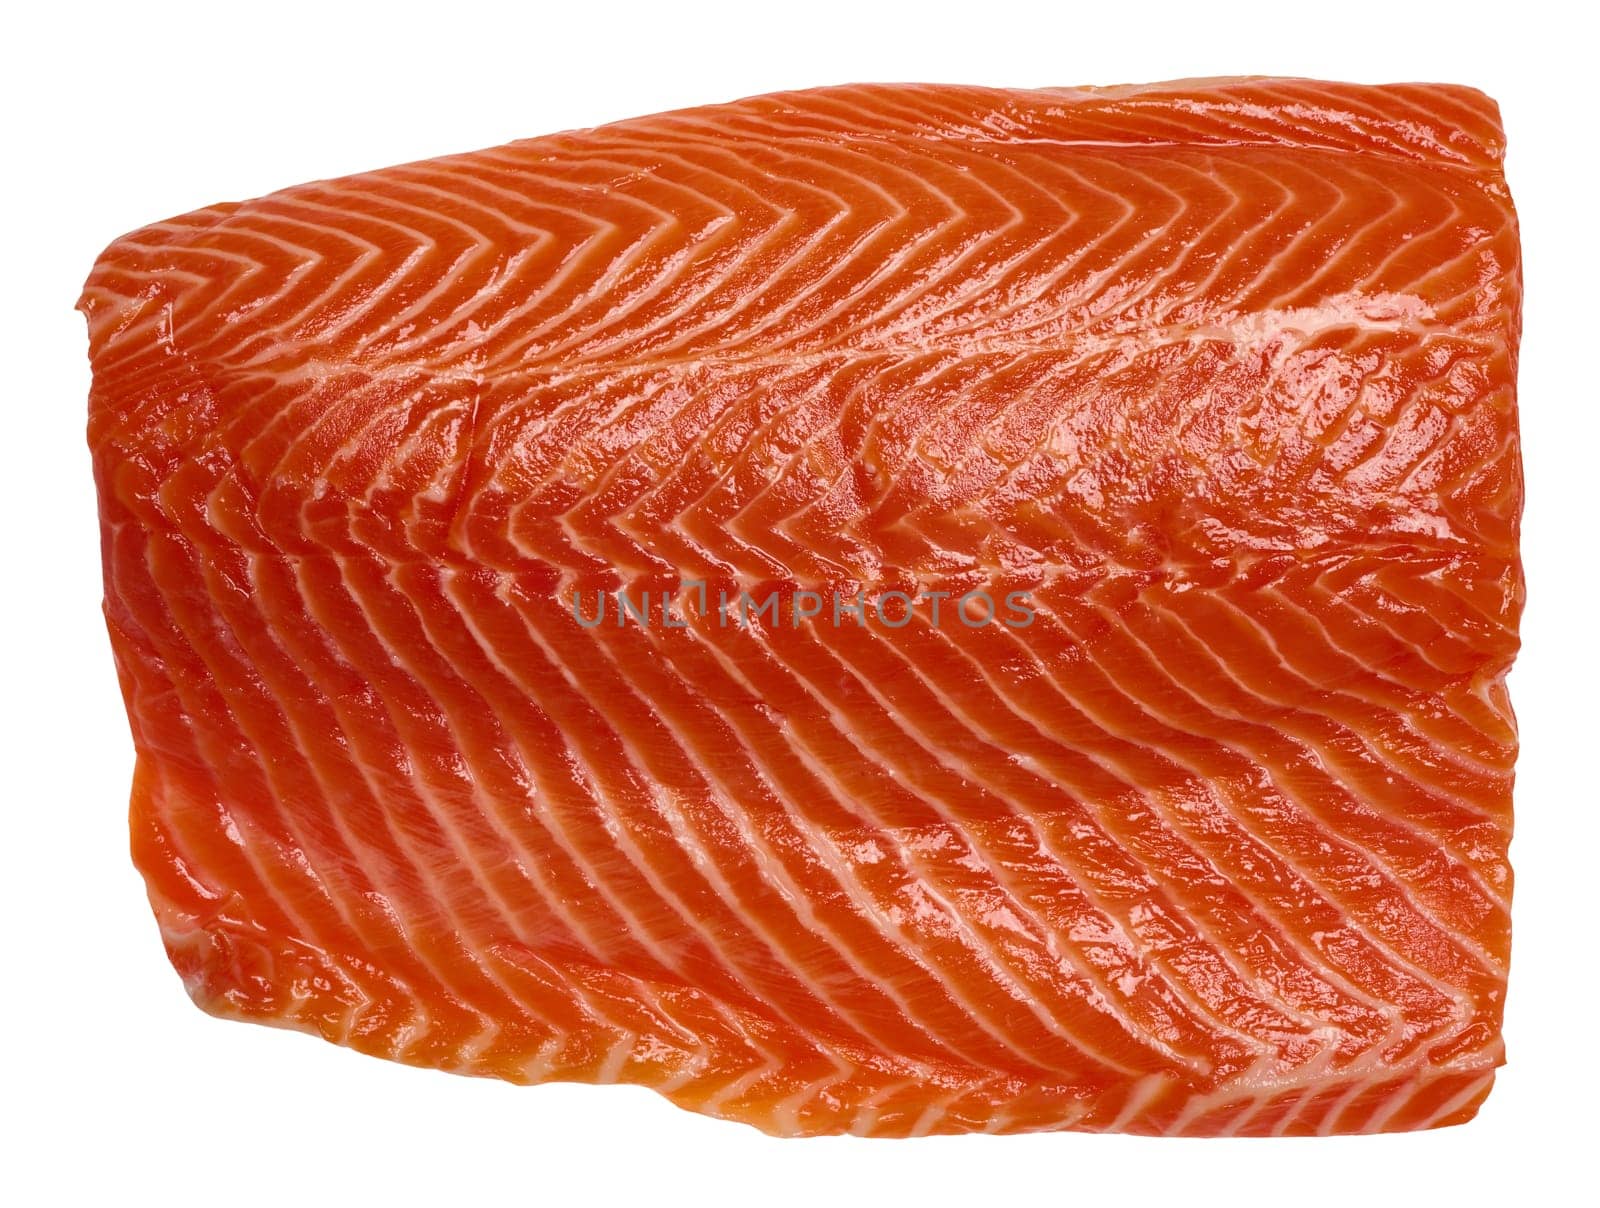 Raw trout fillet on isolated background, top view